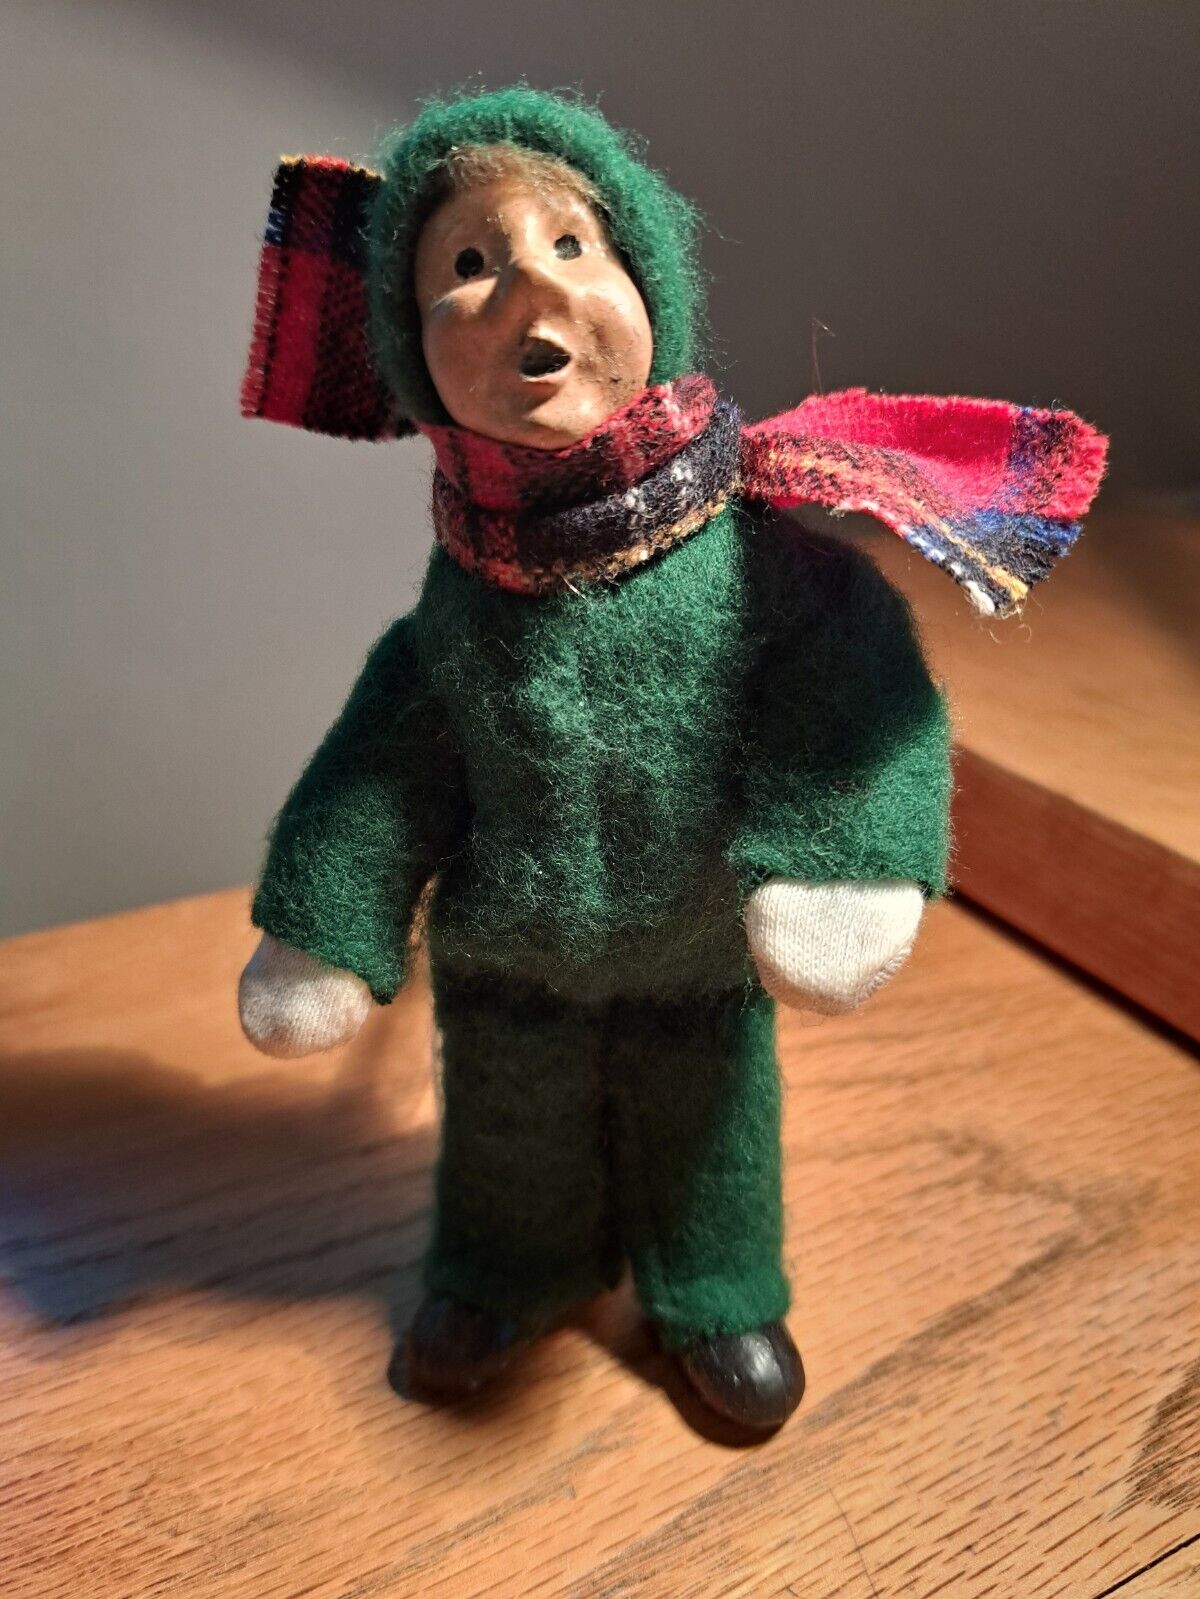 Vintage 1991 Byers' Choice Child Doll in Green Snowsuit